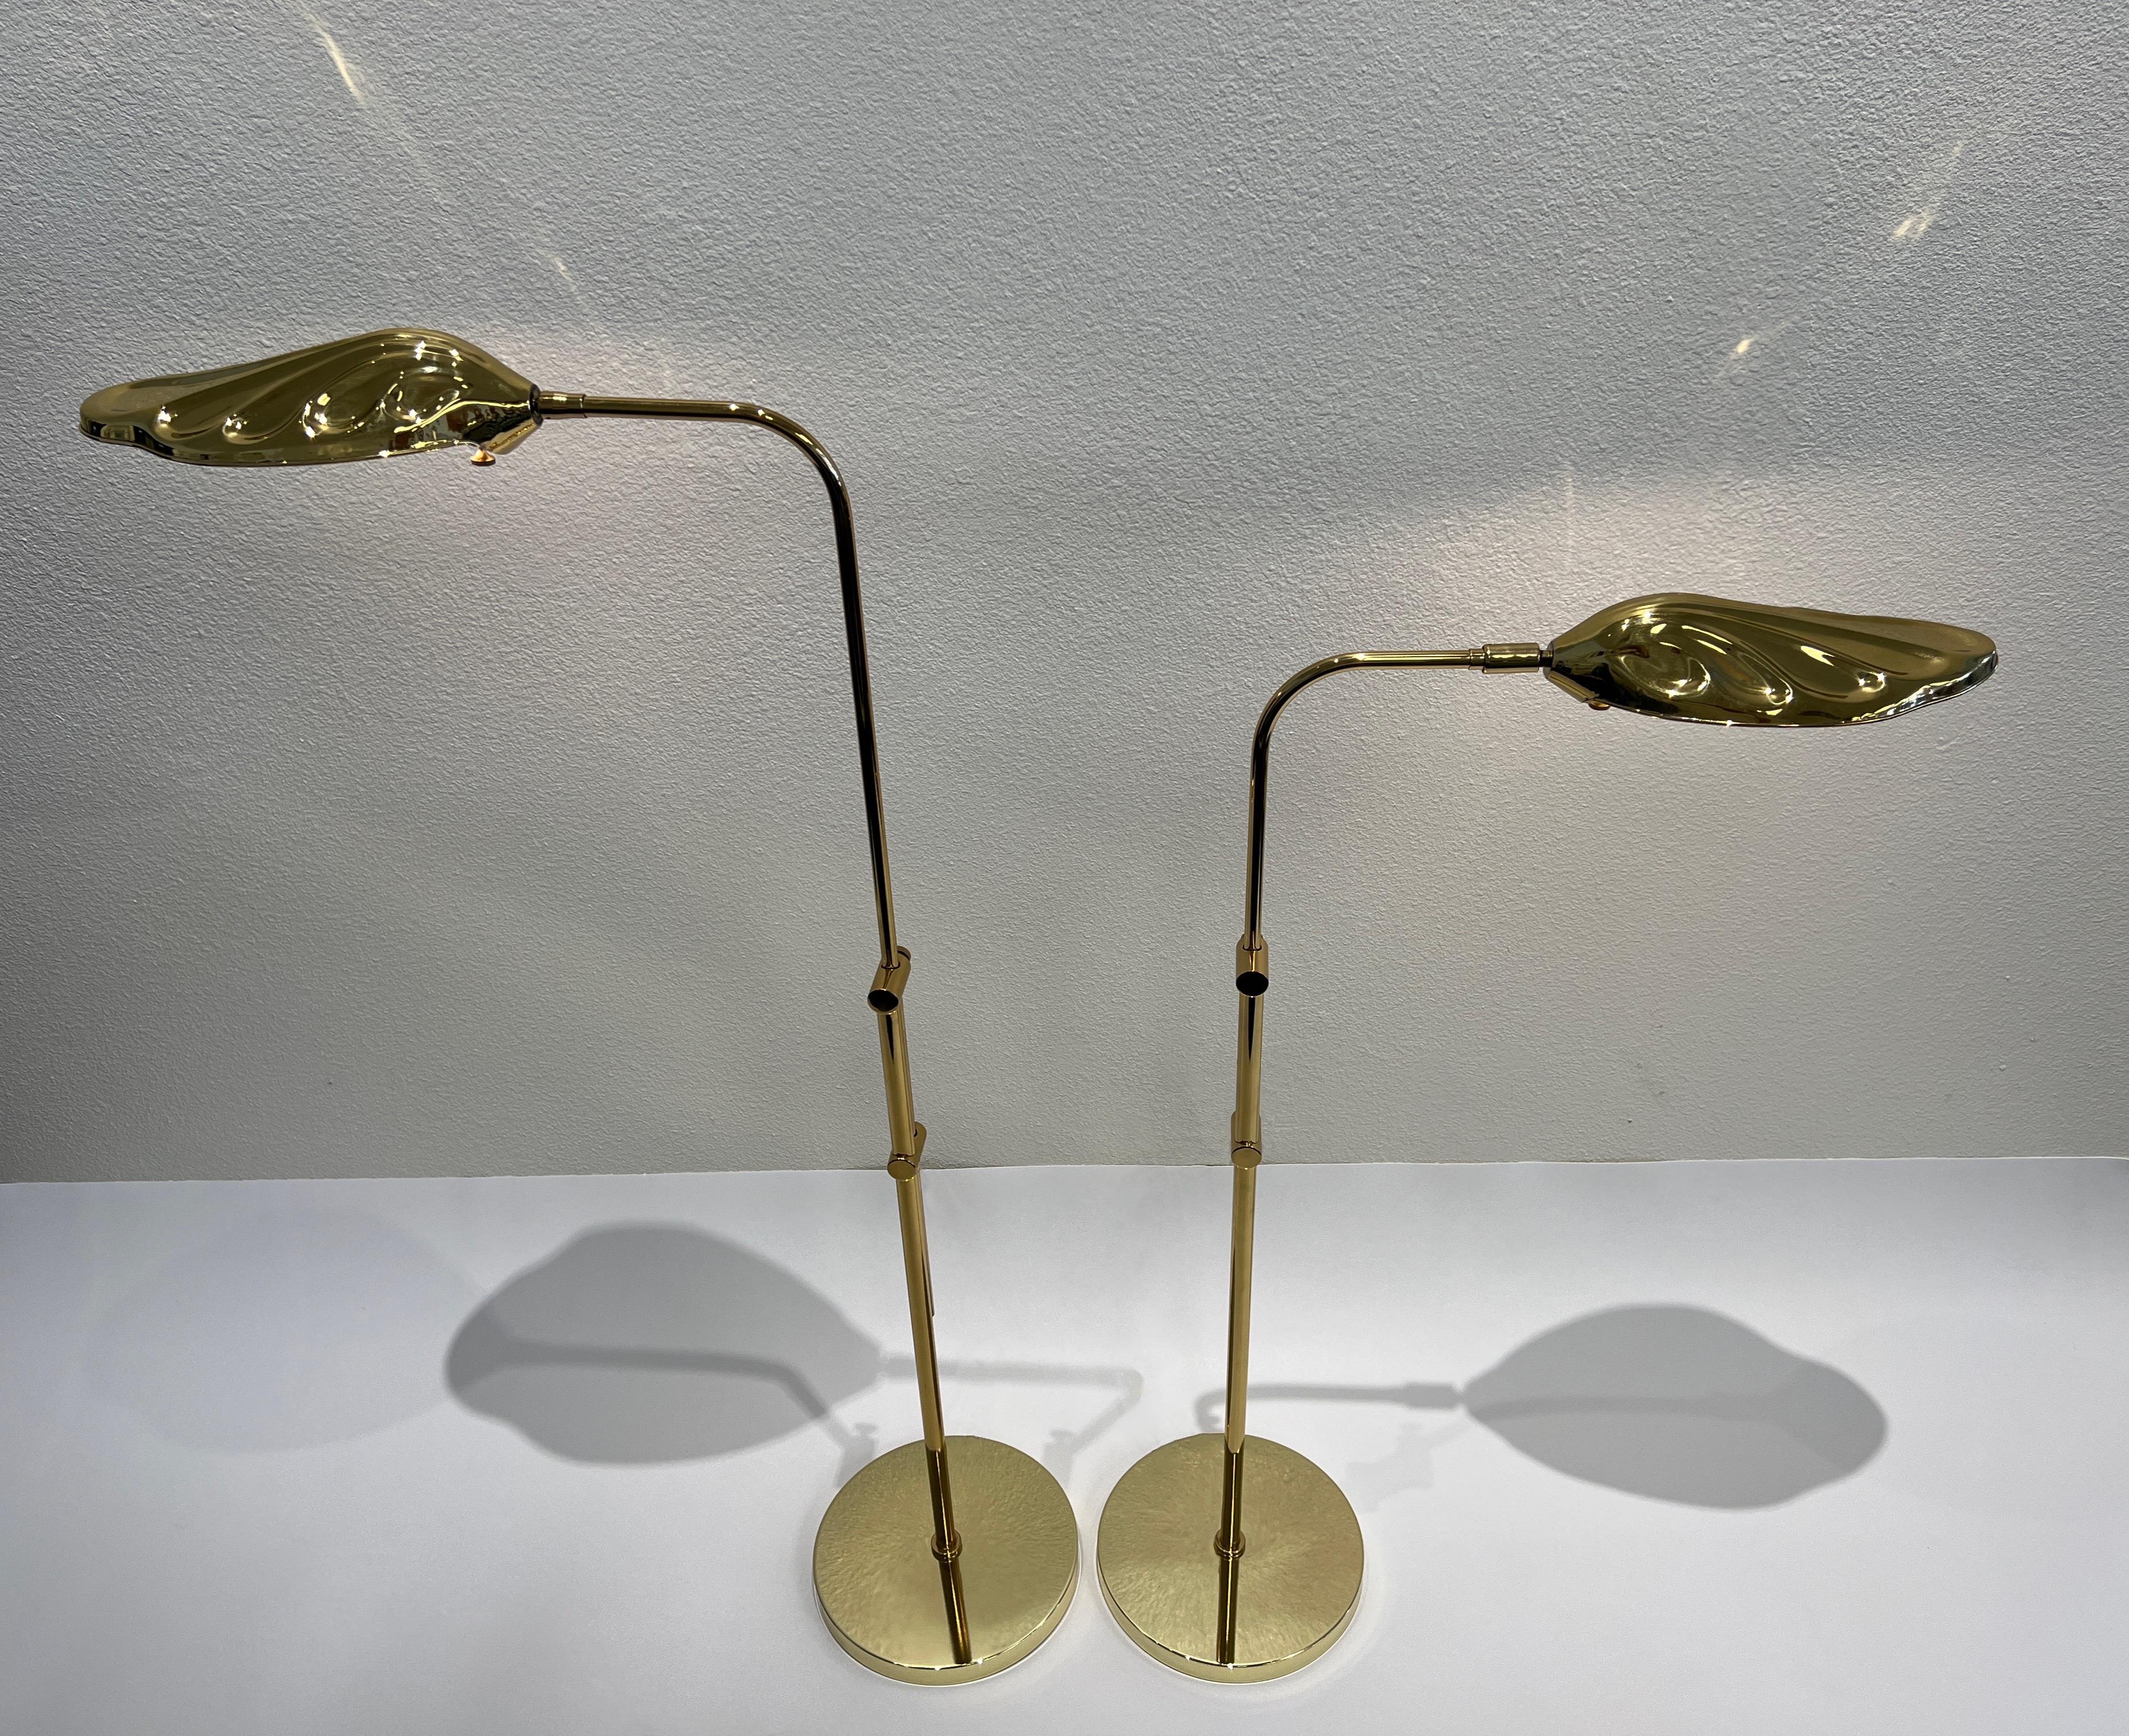 Pair of 1970’s polish brass leaf floor lamps attributed to Chapman. 
Newly rewired, can be adjusted up and down and rotated 360. 
75w max Edison lightbulb recommended. 
They show minor wear consistent with age. 

Measurements: 
24” wide, 10”